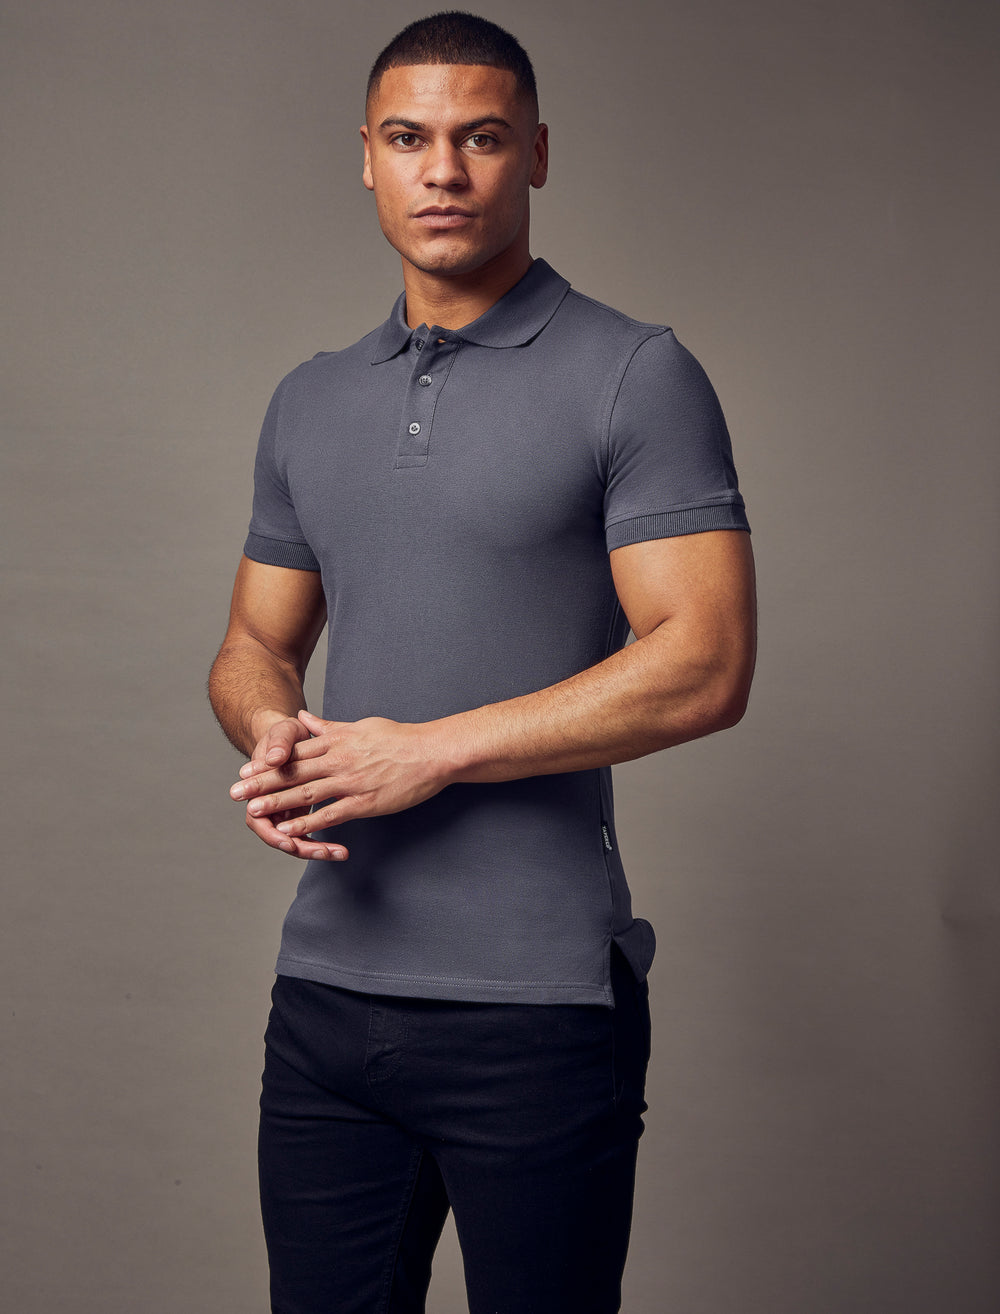 dark grey muscle fit short sleeve polo shirt, highlighting the tapered fit and premium quality offered by Tapered Menswear